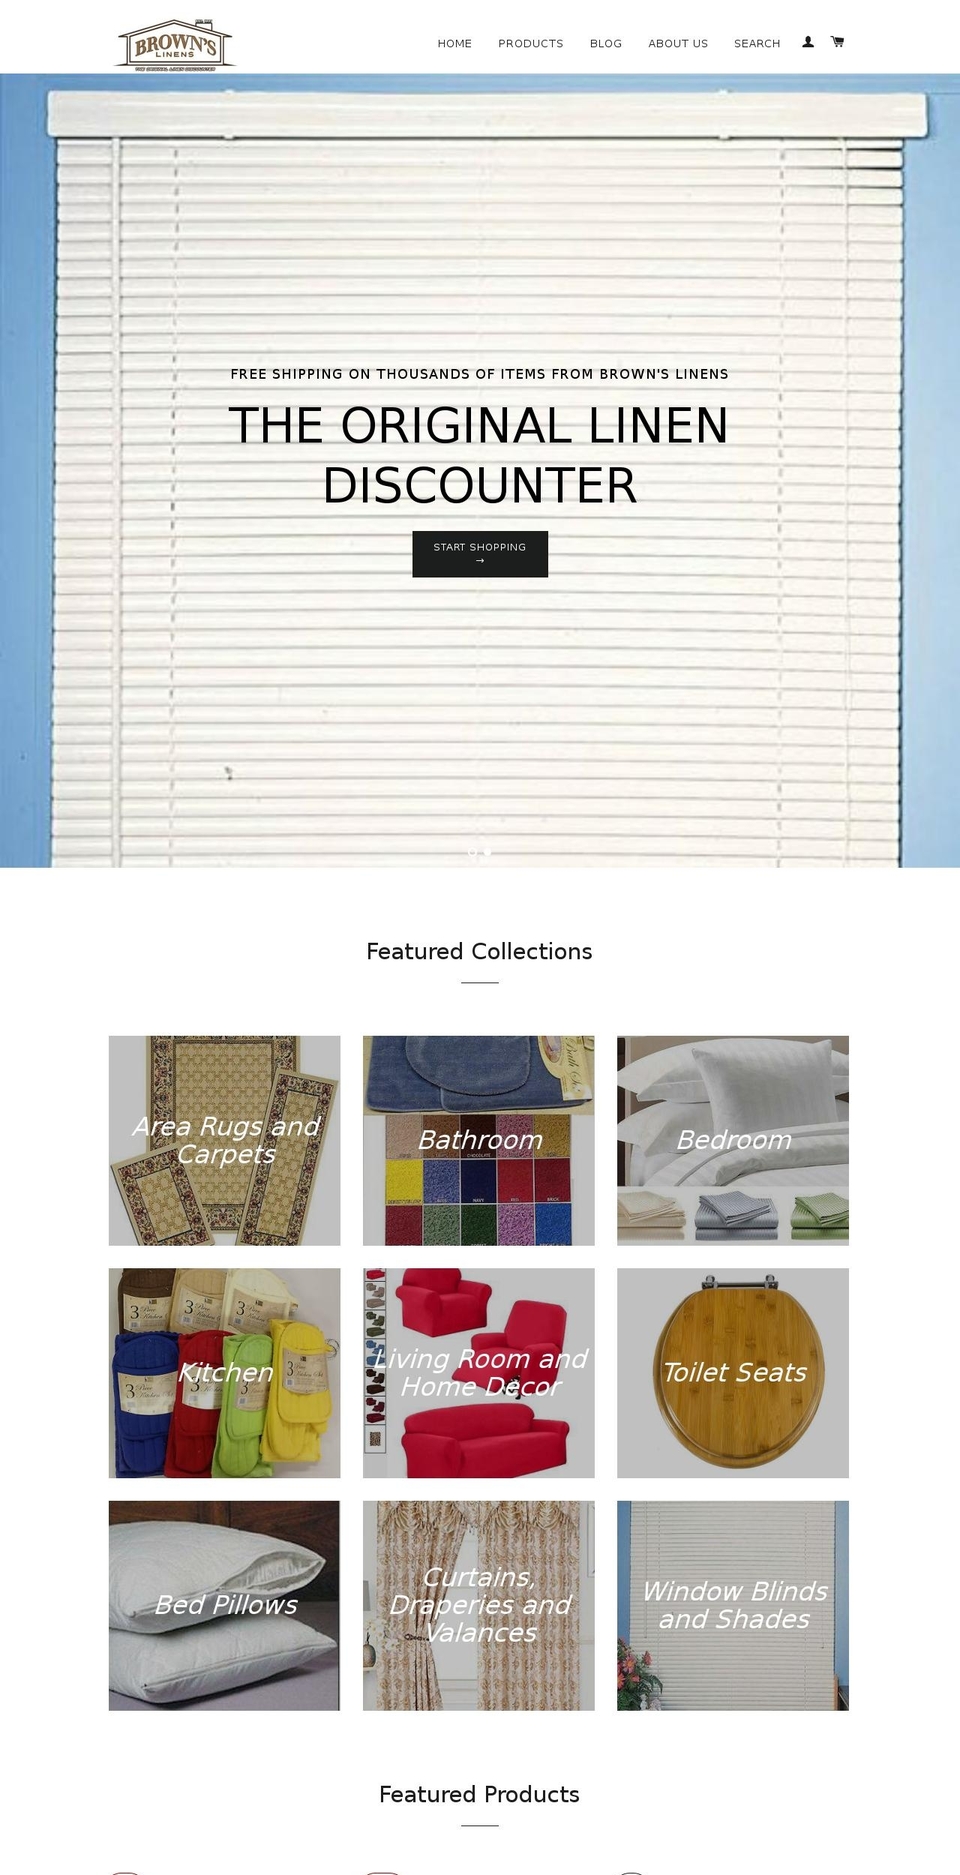 qeretail Shopify theme site example brownslinens.com